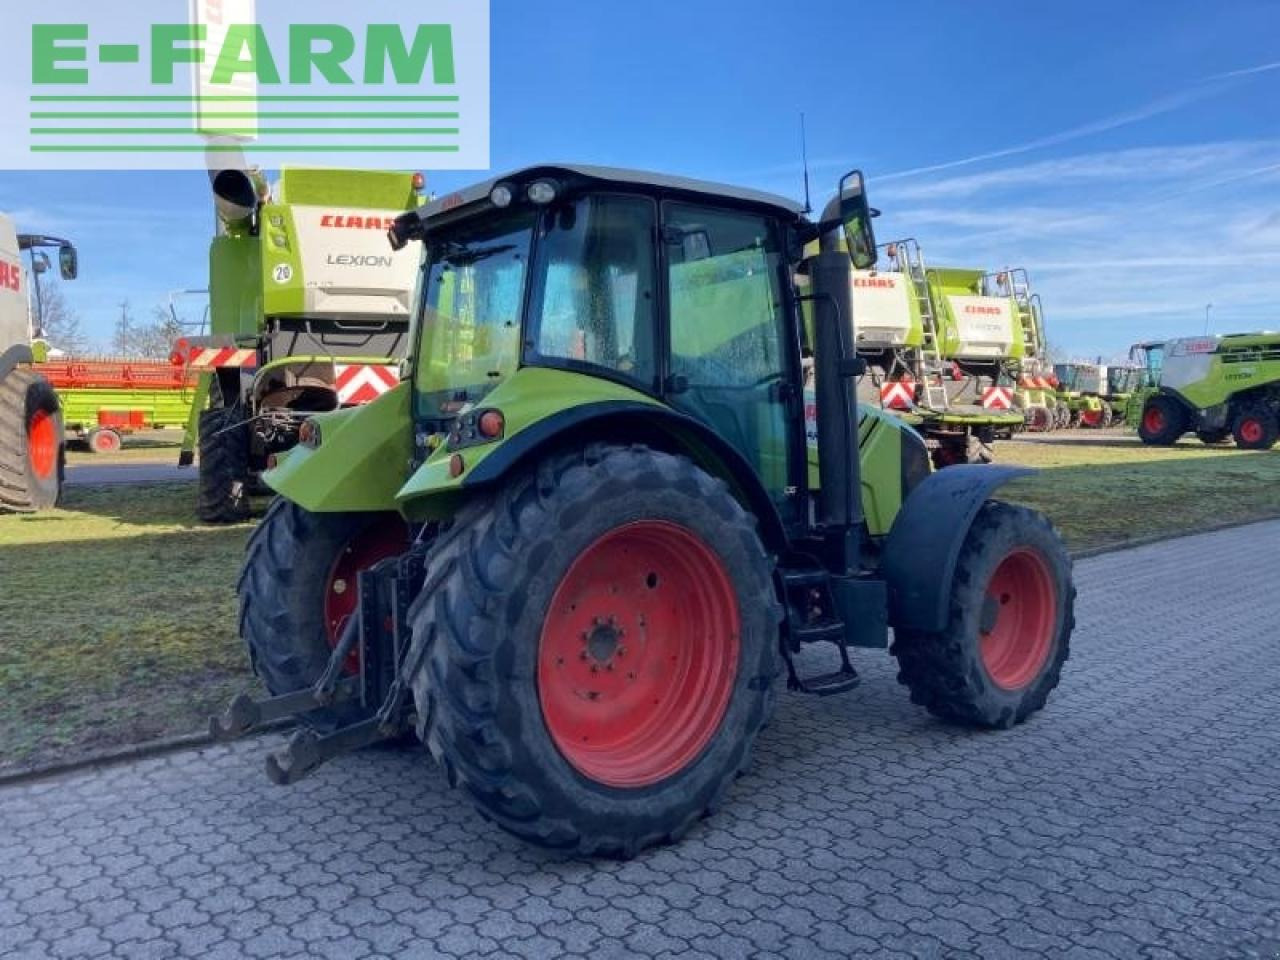 Tractor CLAAS arion 430 cis